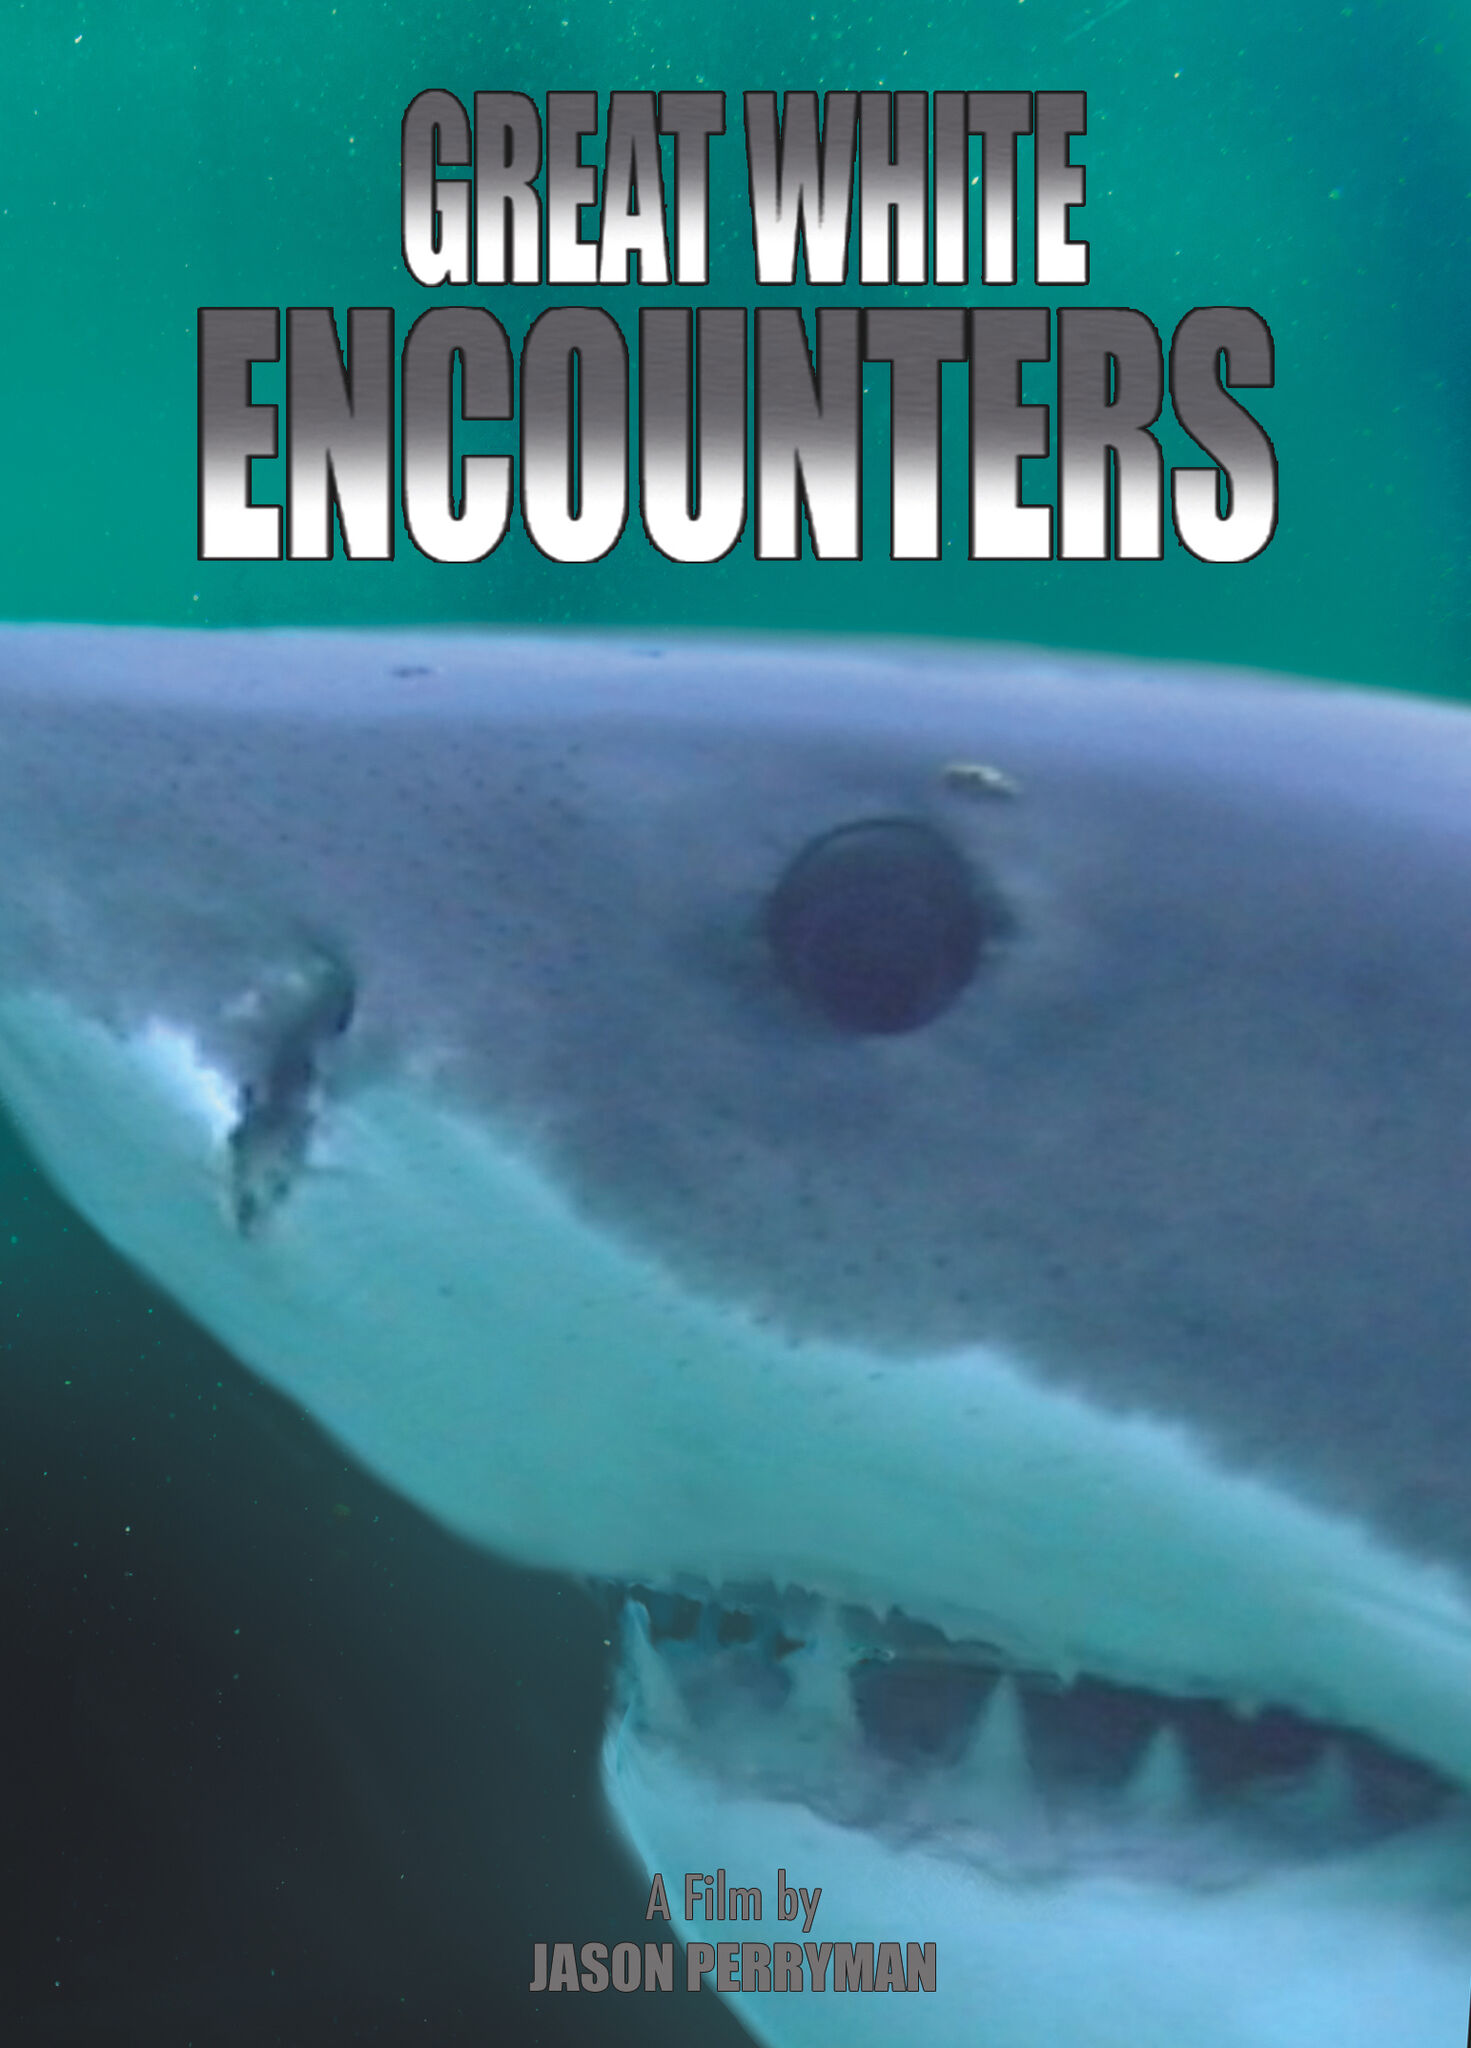 GREAT WHITE ENCOUNTERS